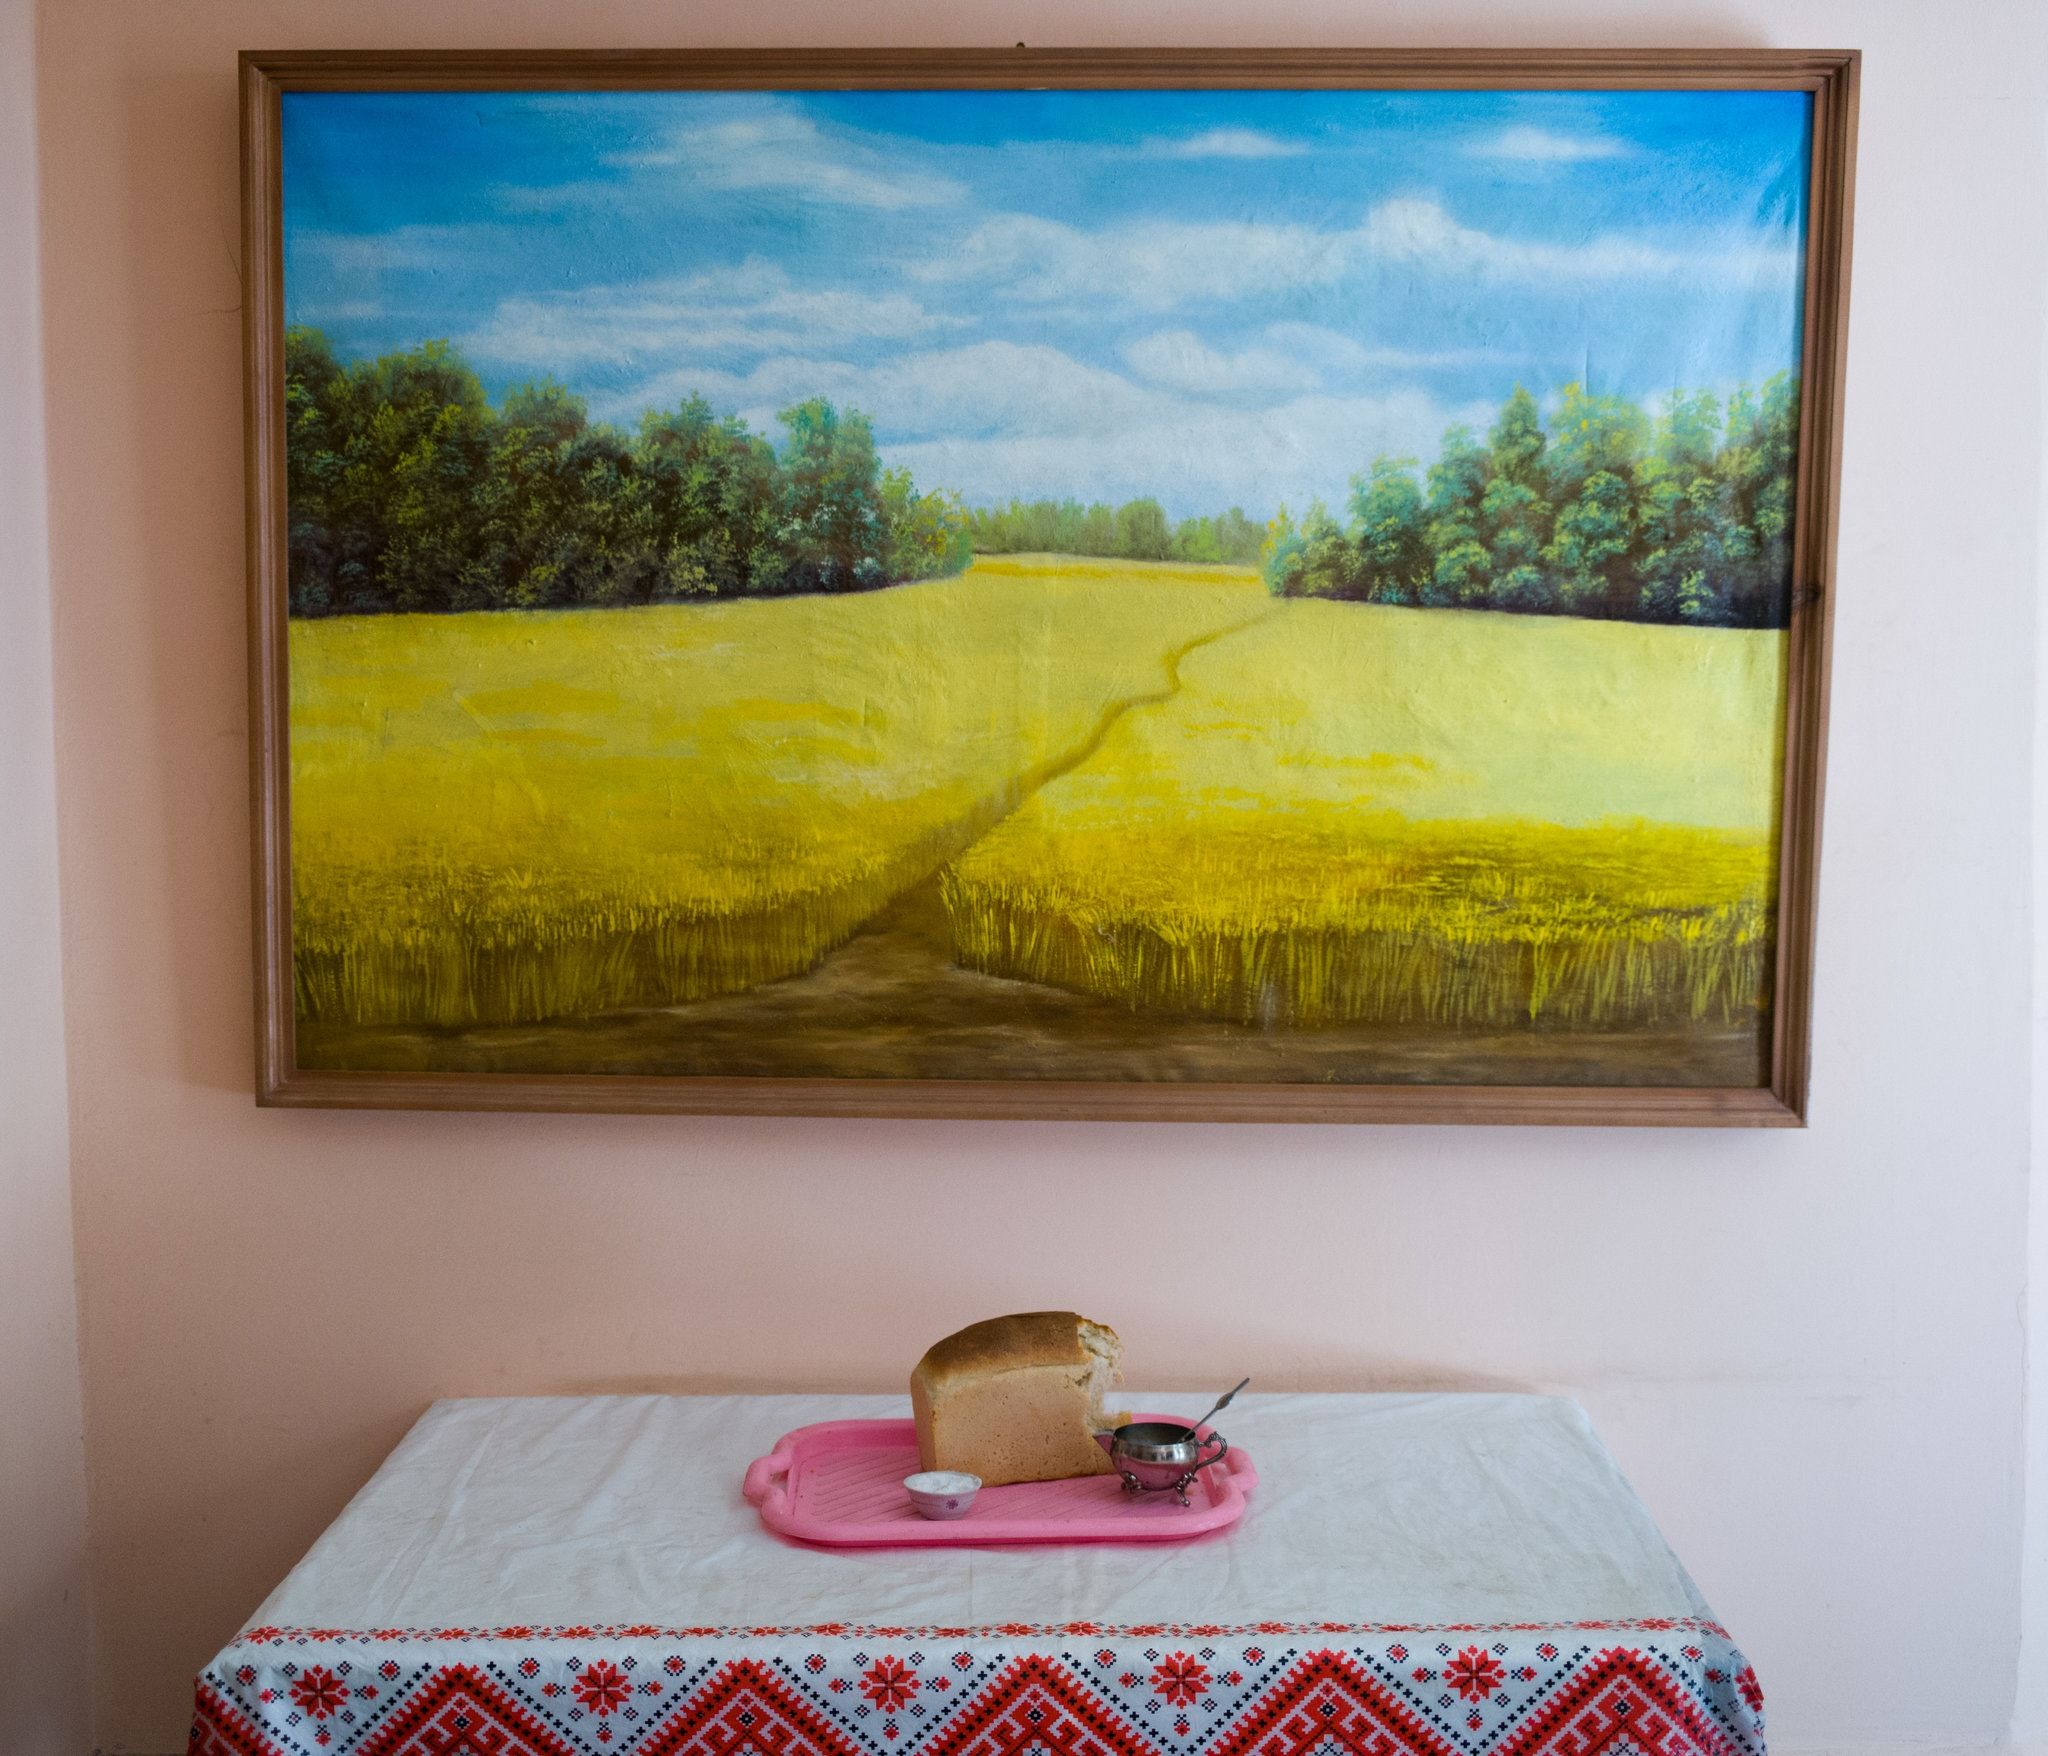 Below a painting of wheat, there is a table with bread and salt for visitors in a pretrial detention center. The prisoners make the bread. The painting is in the national colors. Image by Misha Friedman. Ukraine, undated.
